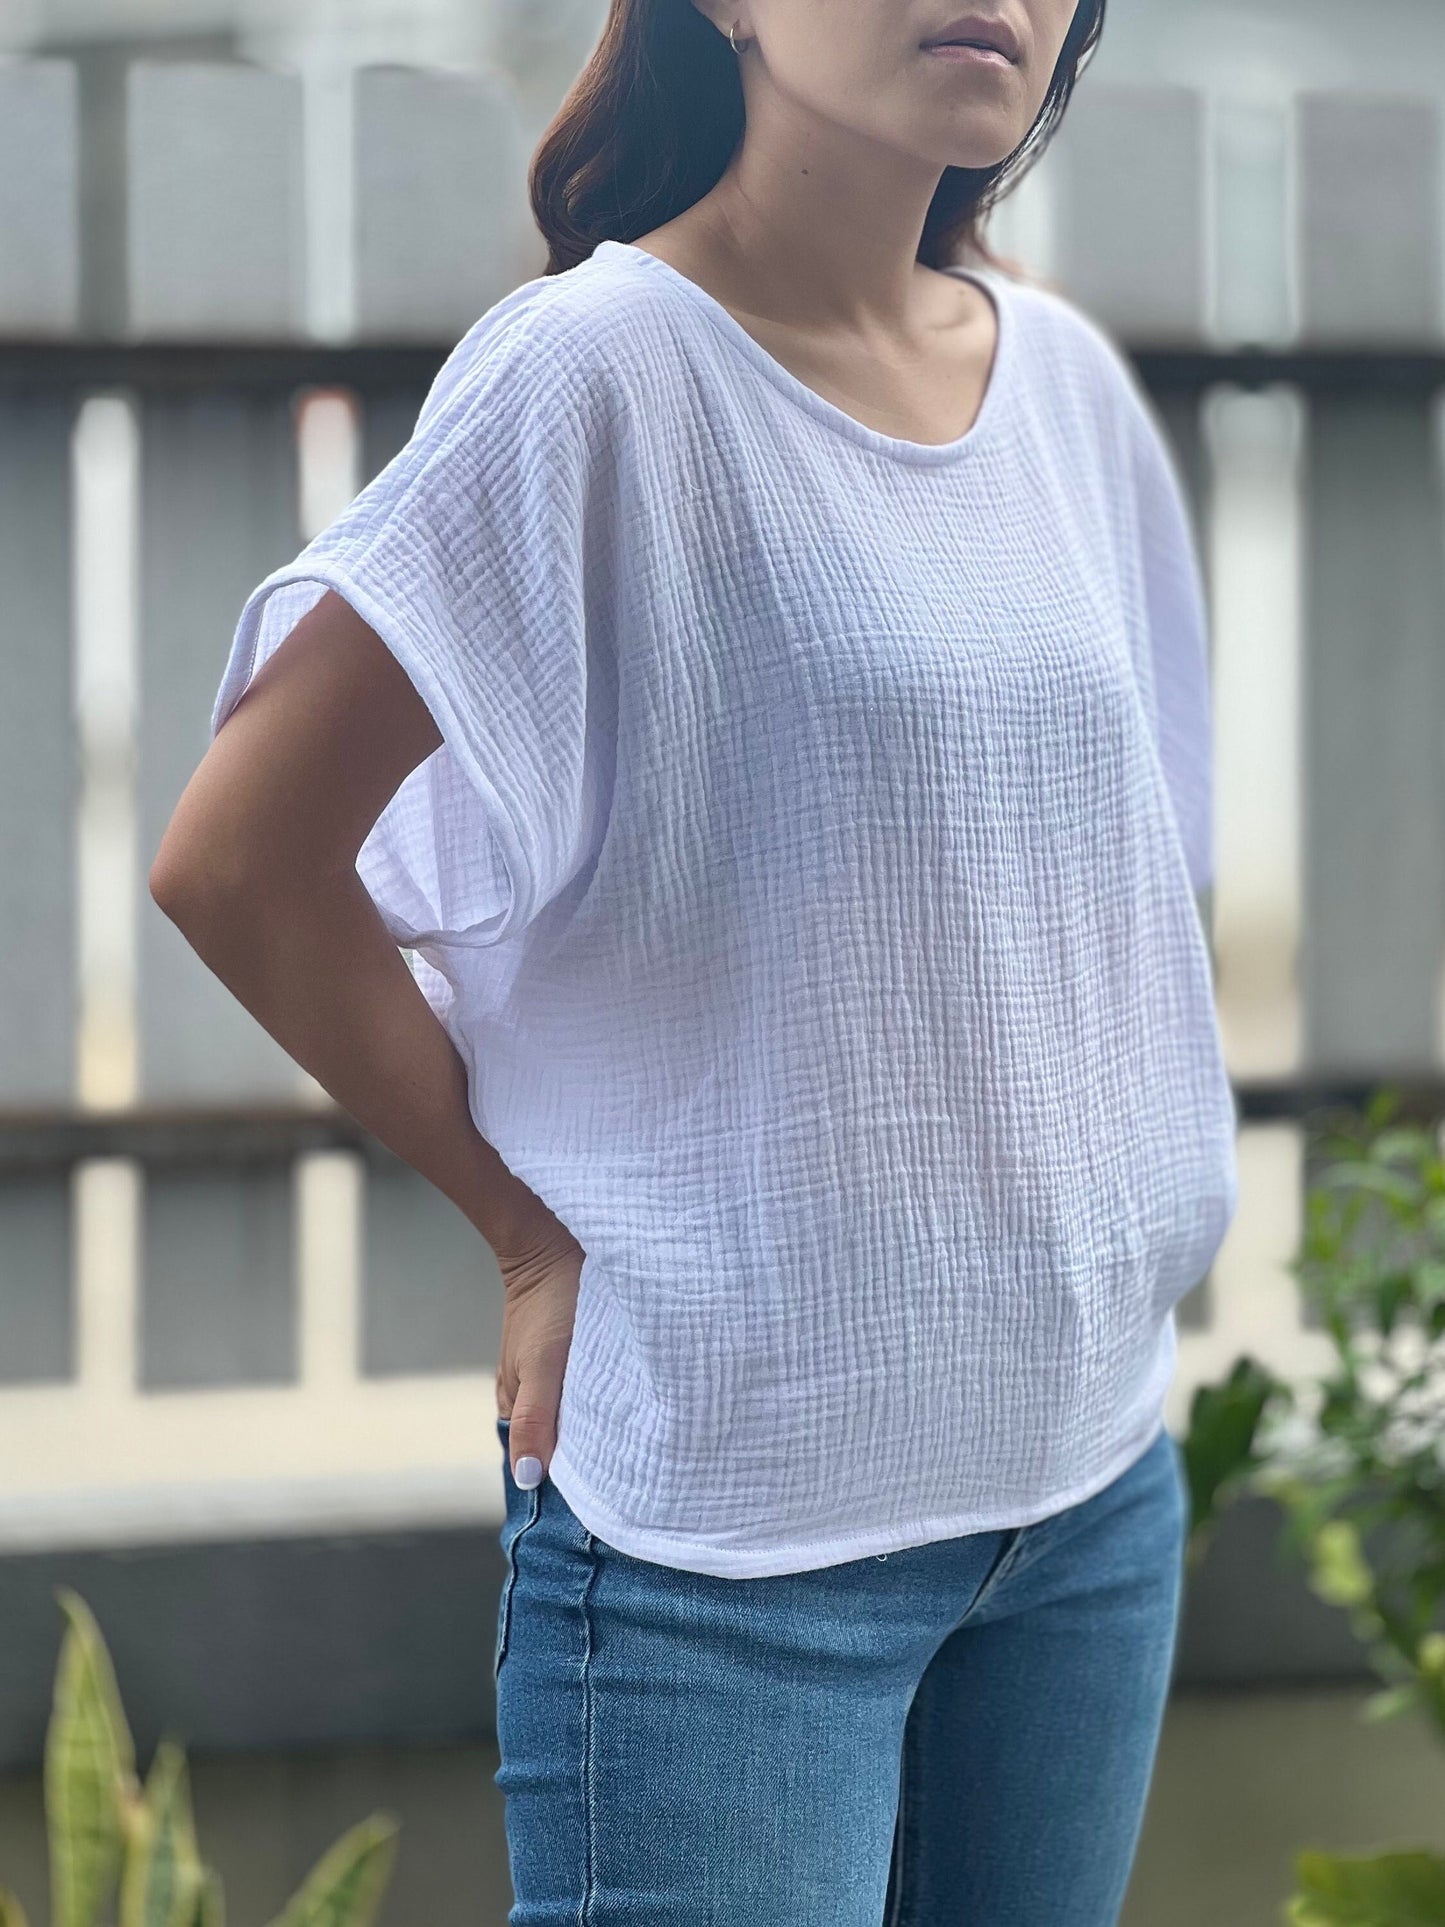 Double Gauze Scoop Neck Loose-Fitting Blouse